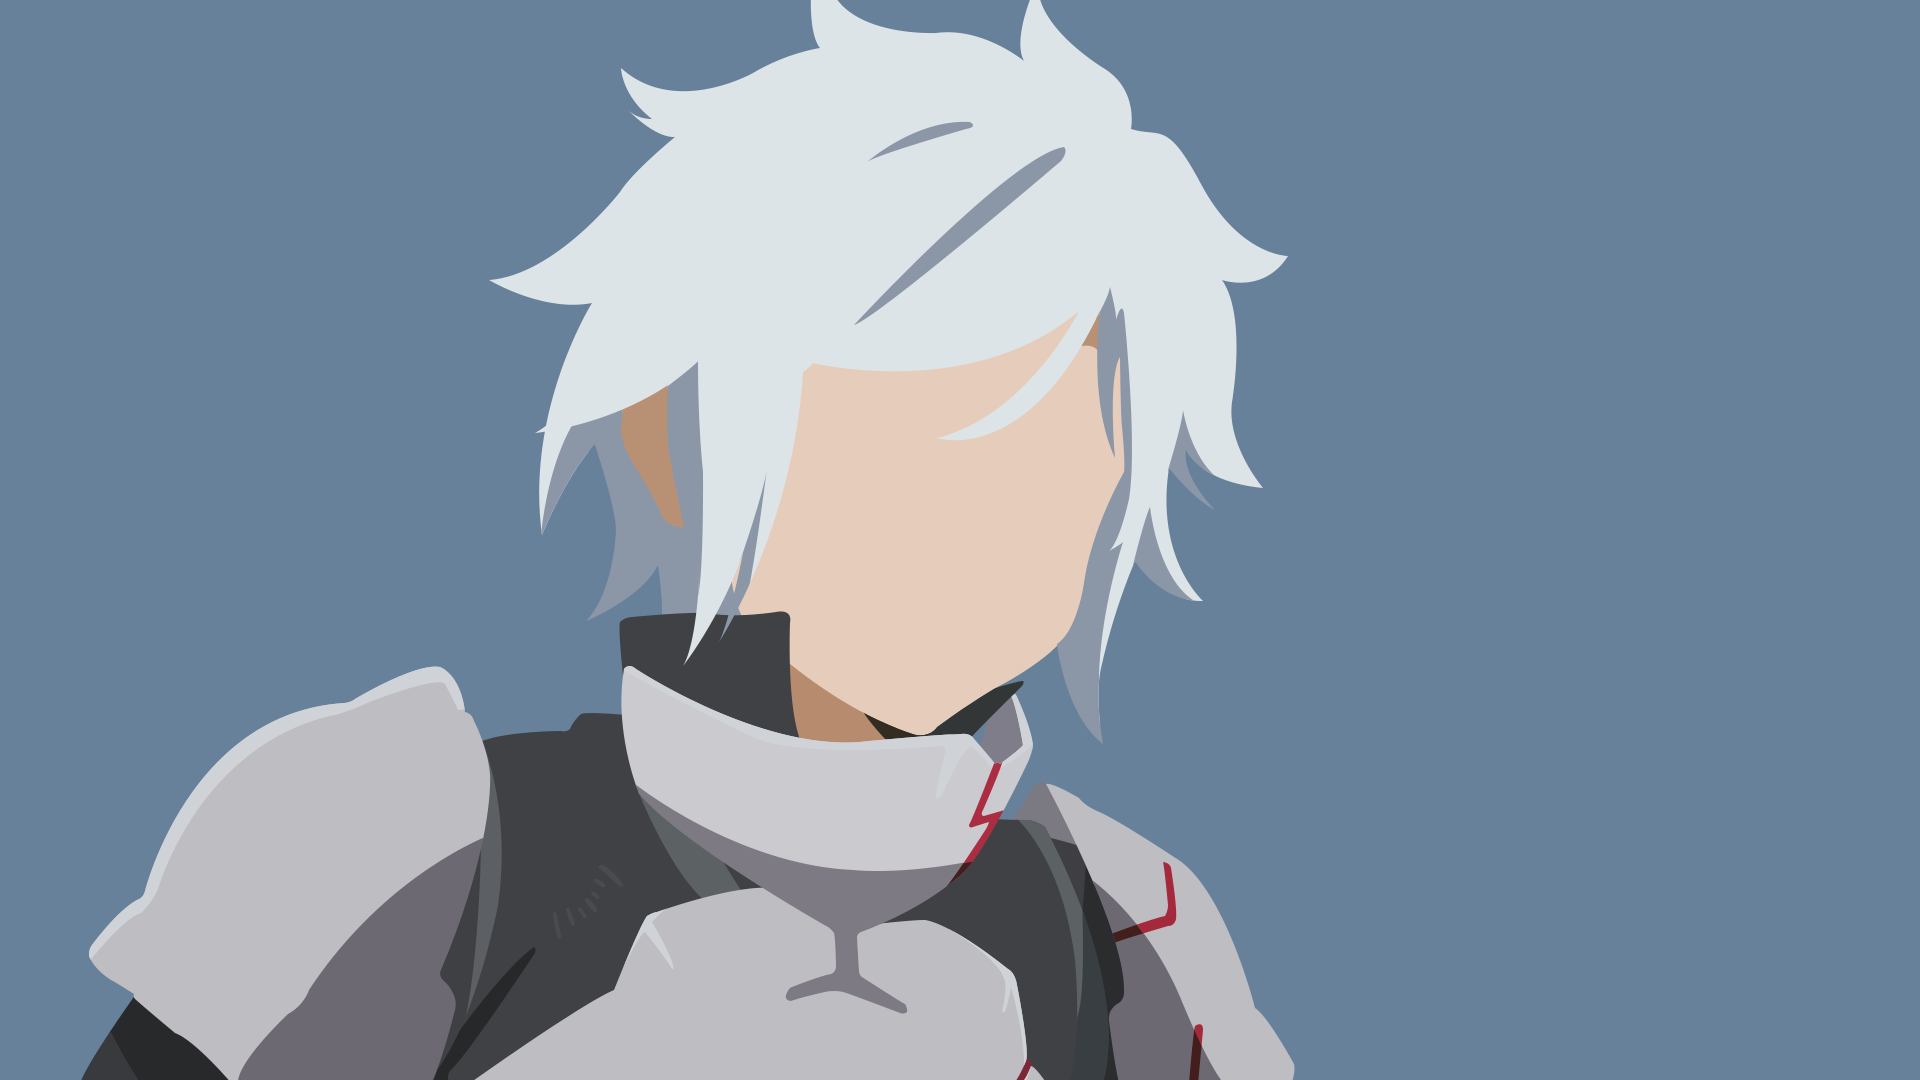 Bell Cranel from Is It Wrong to Try to Pick Up Girls in a Dungeon? Minimalist Wallpaper for Dekstop by Zunnn